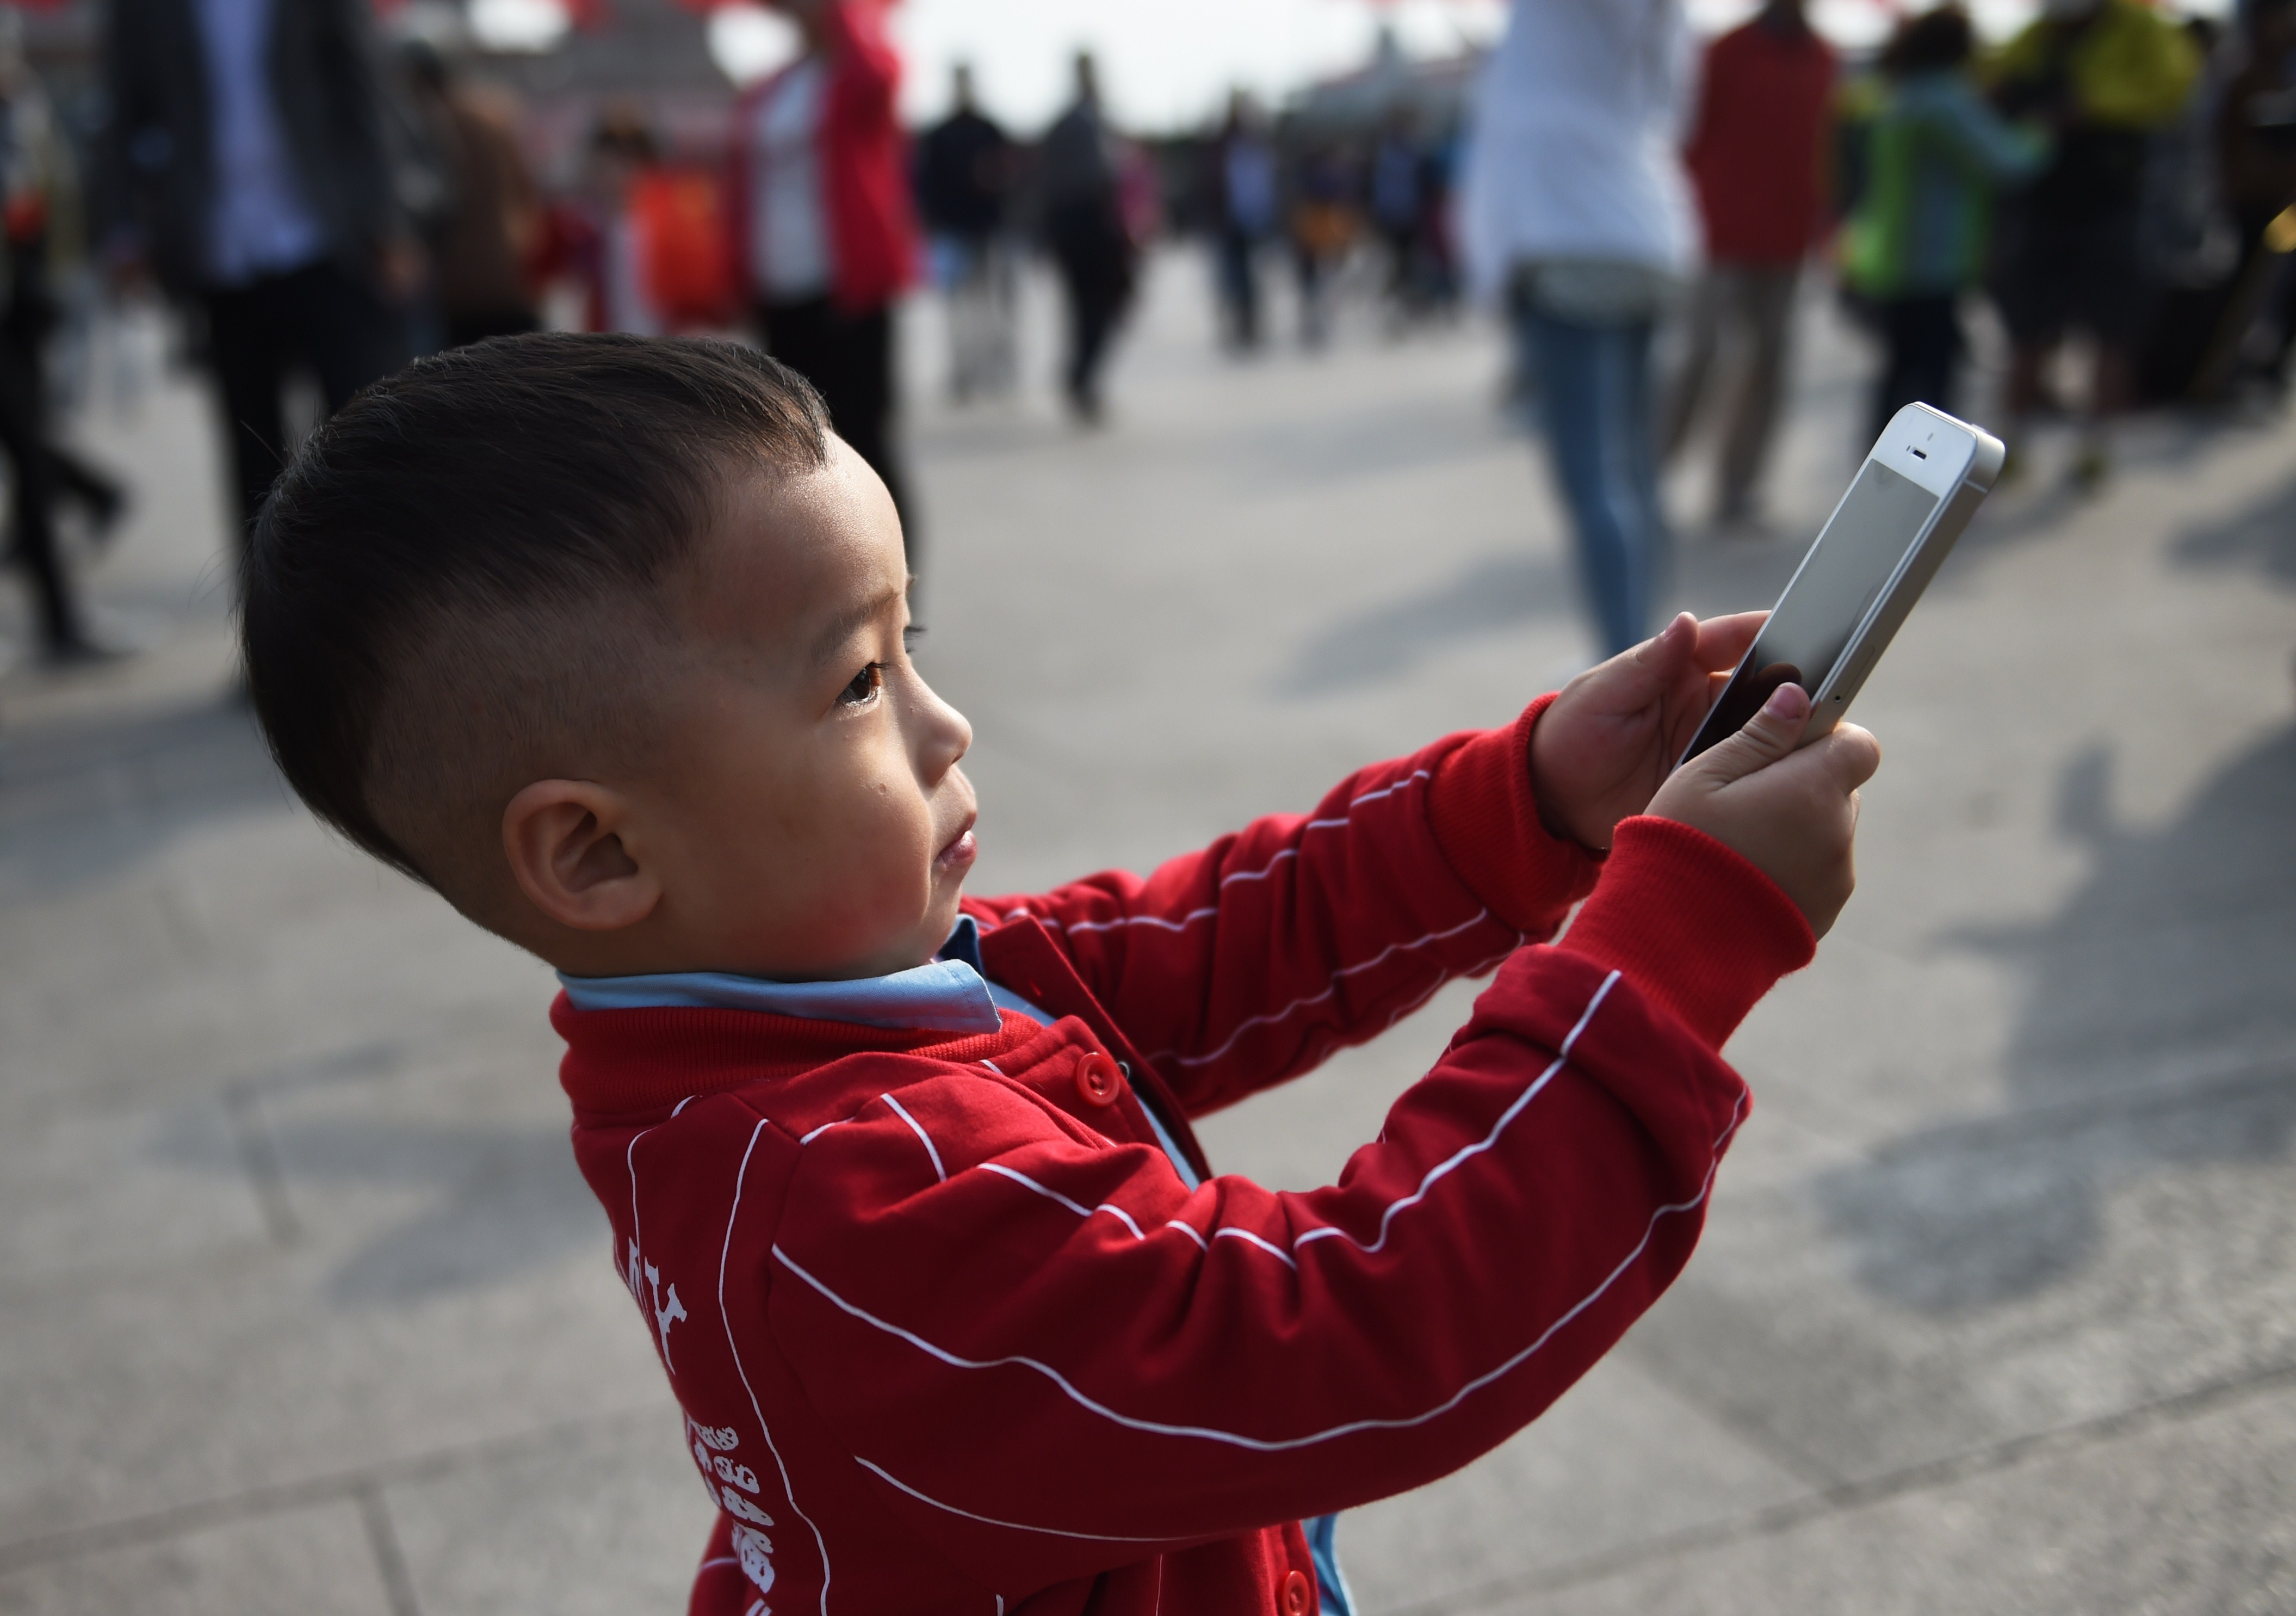 A young boy uses an iPhone to take photos in Tiananmen Square in Beijing on September 30, 2014. (Greg Baker&mdash;AFP/Getty Images)